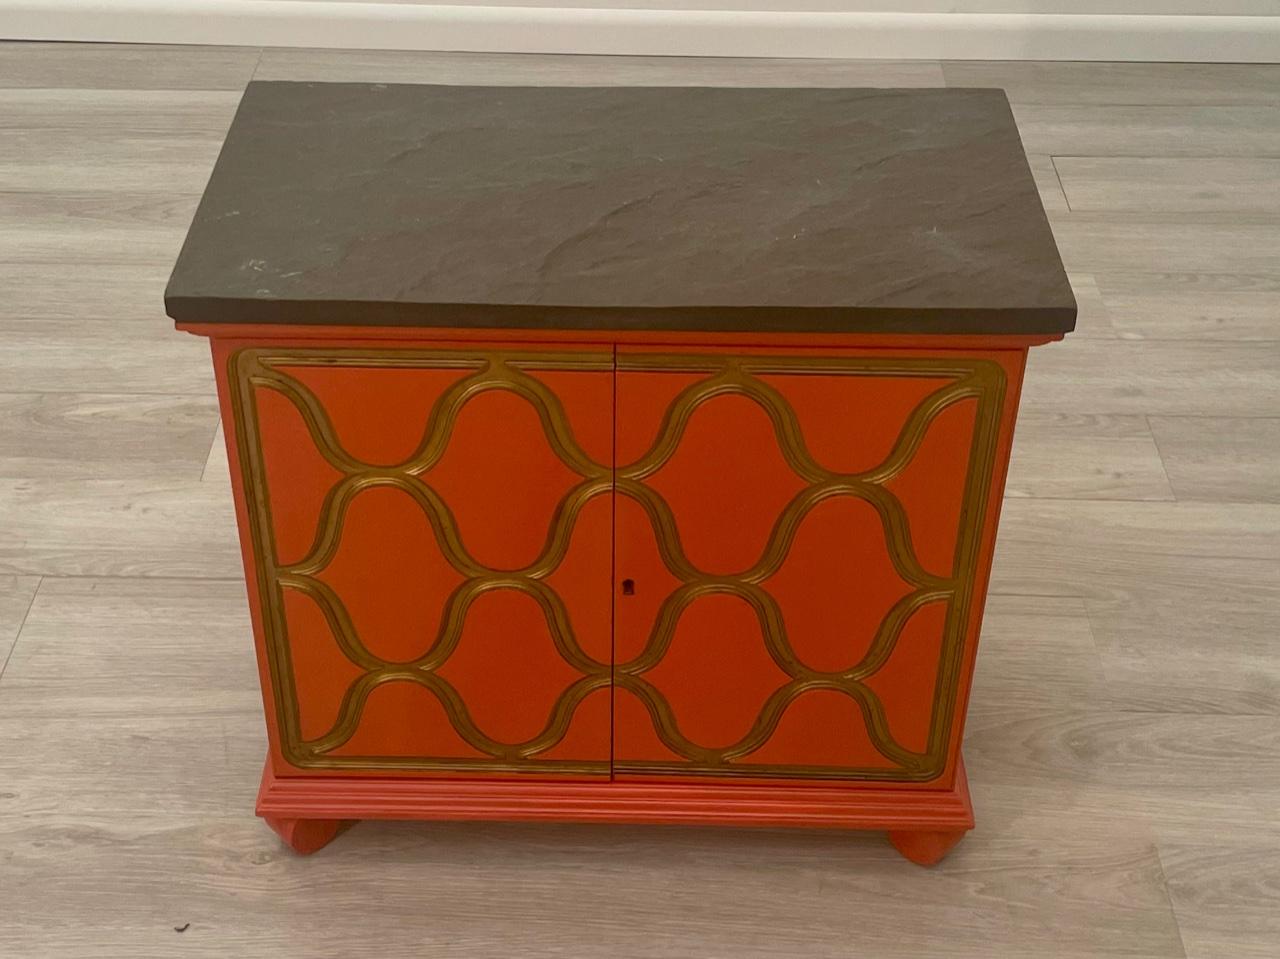 The iconic Espana design cabinet in a striking Hermes orange with gold decoration and black slate top. Stamped Dorothy Draper for Henredon.
In great condition and timeless.